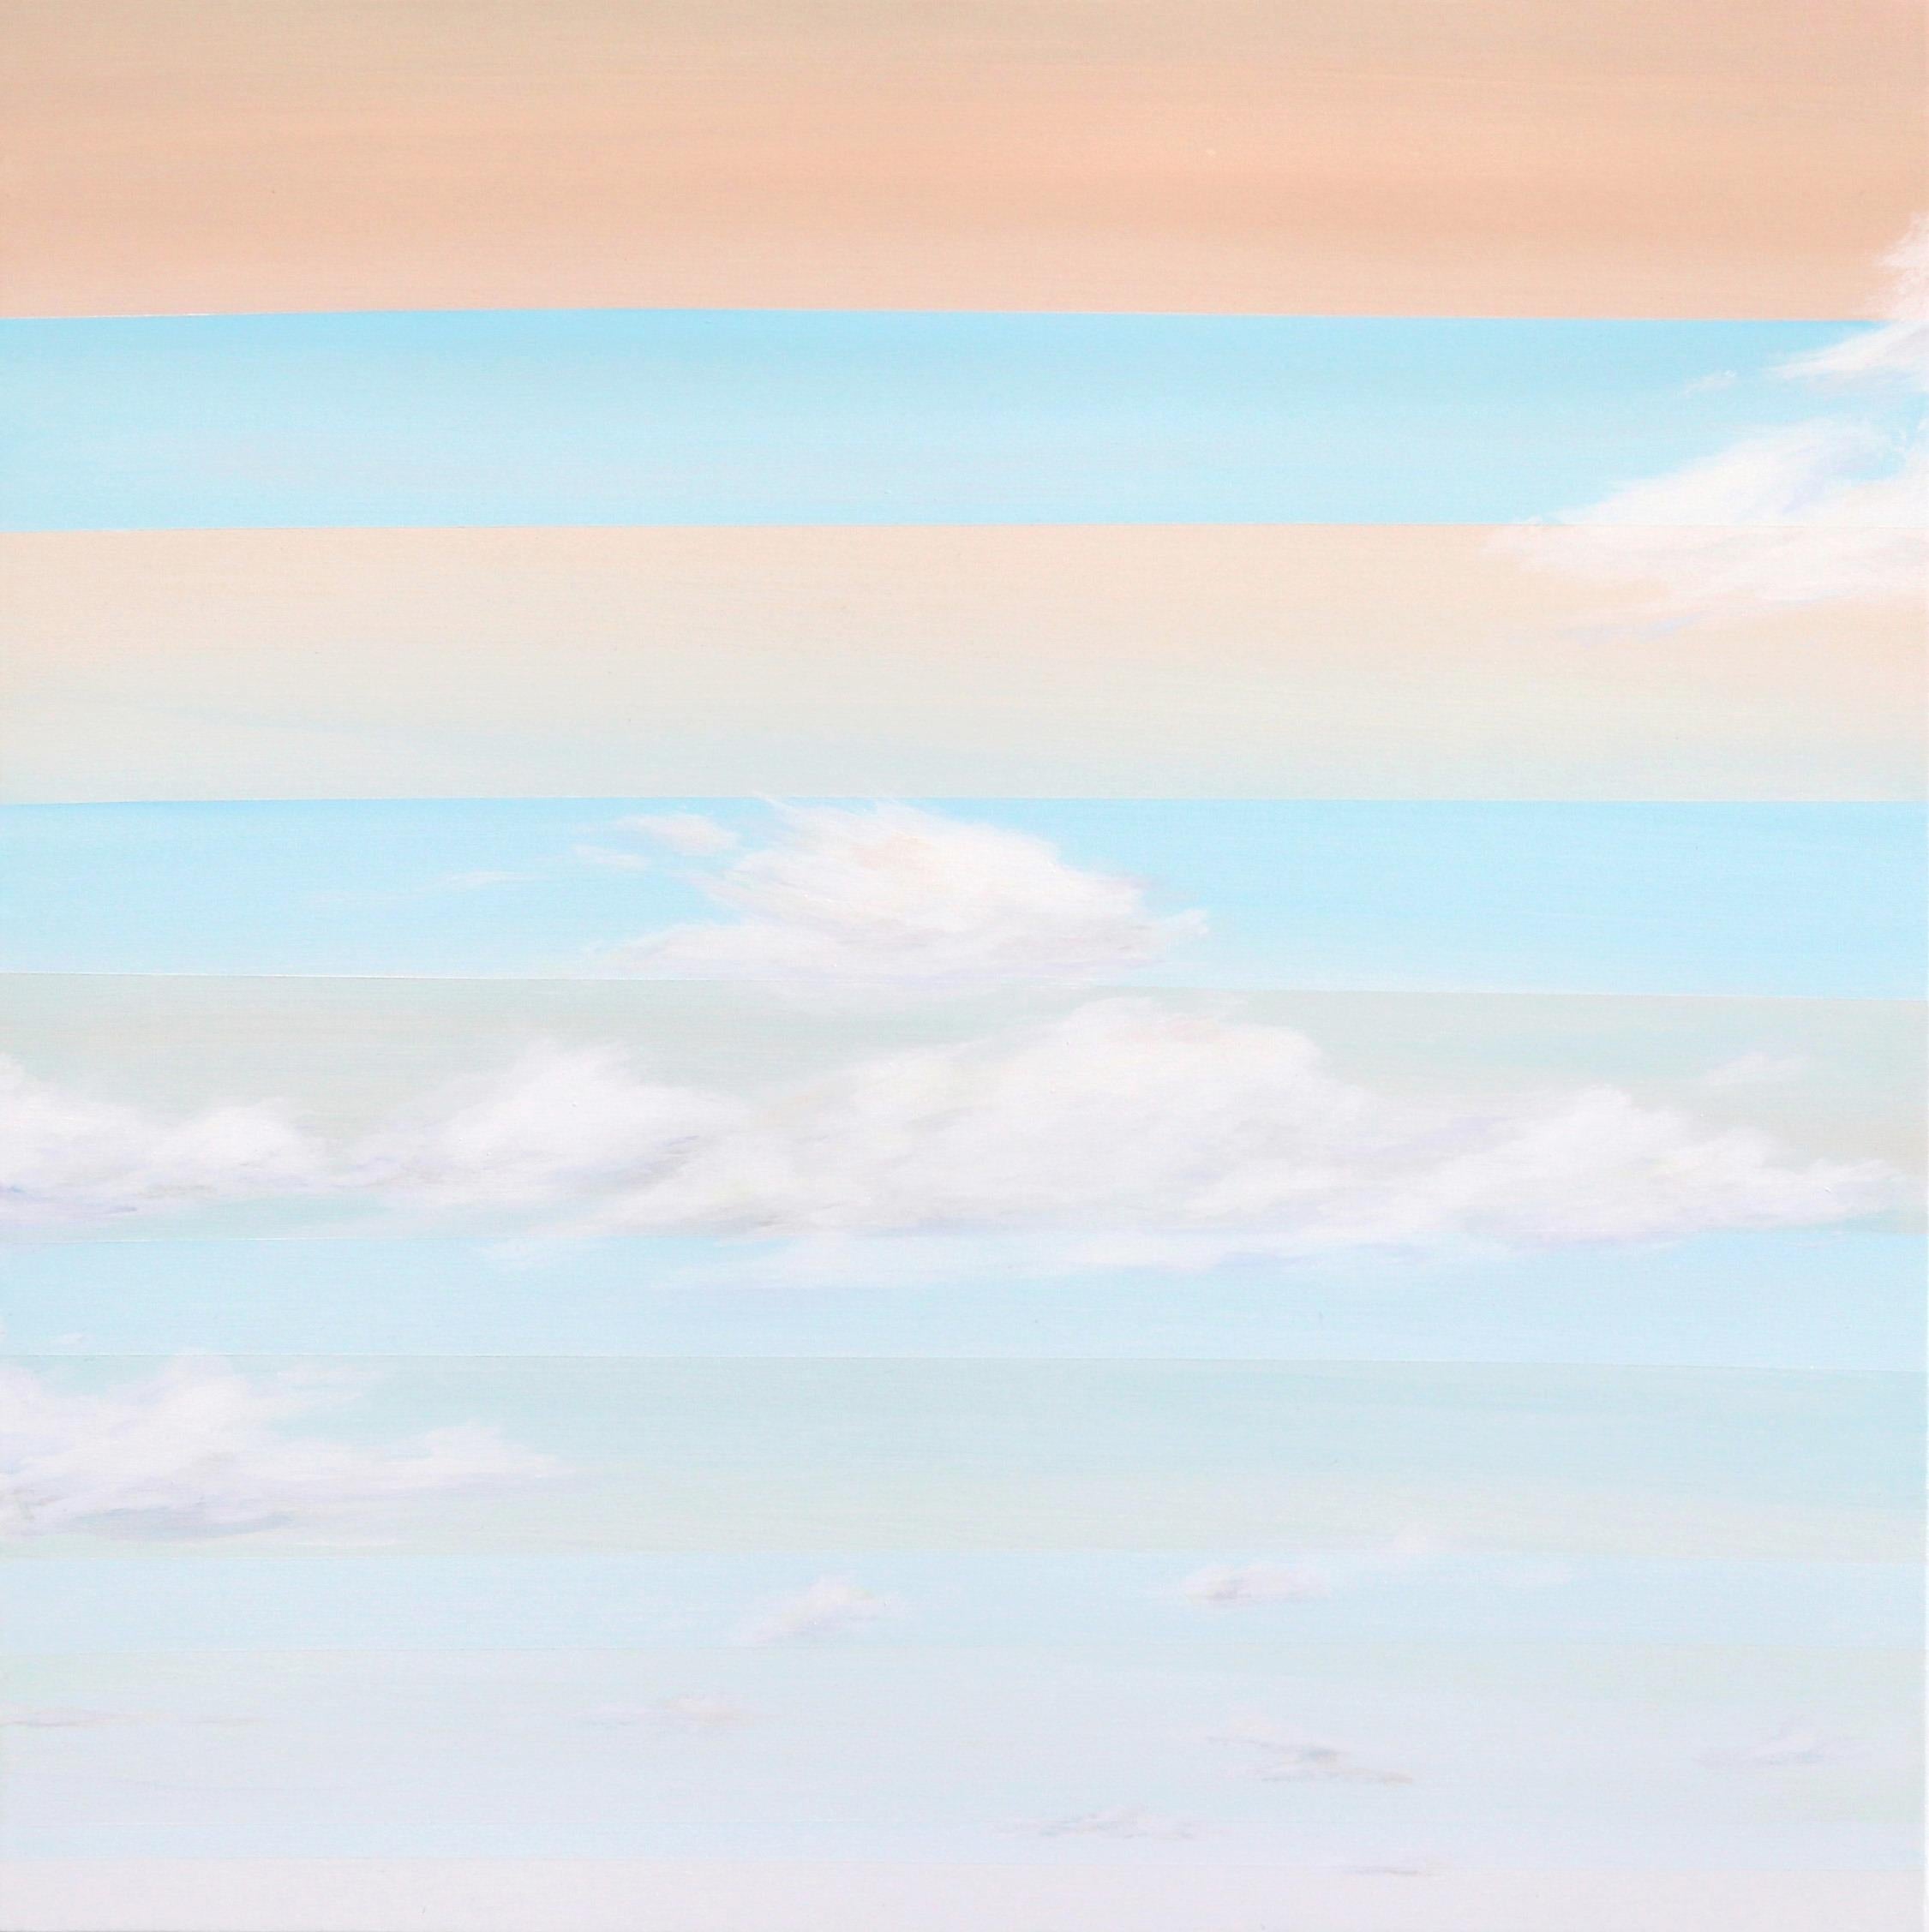 Nichole McDaniel Abstract Painting - Morning Breeze 2 - Original Soft Sky Painting with Geometric Accents